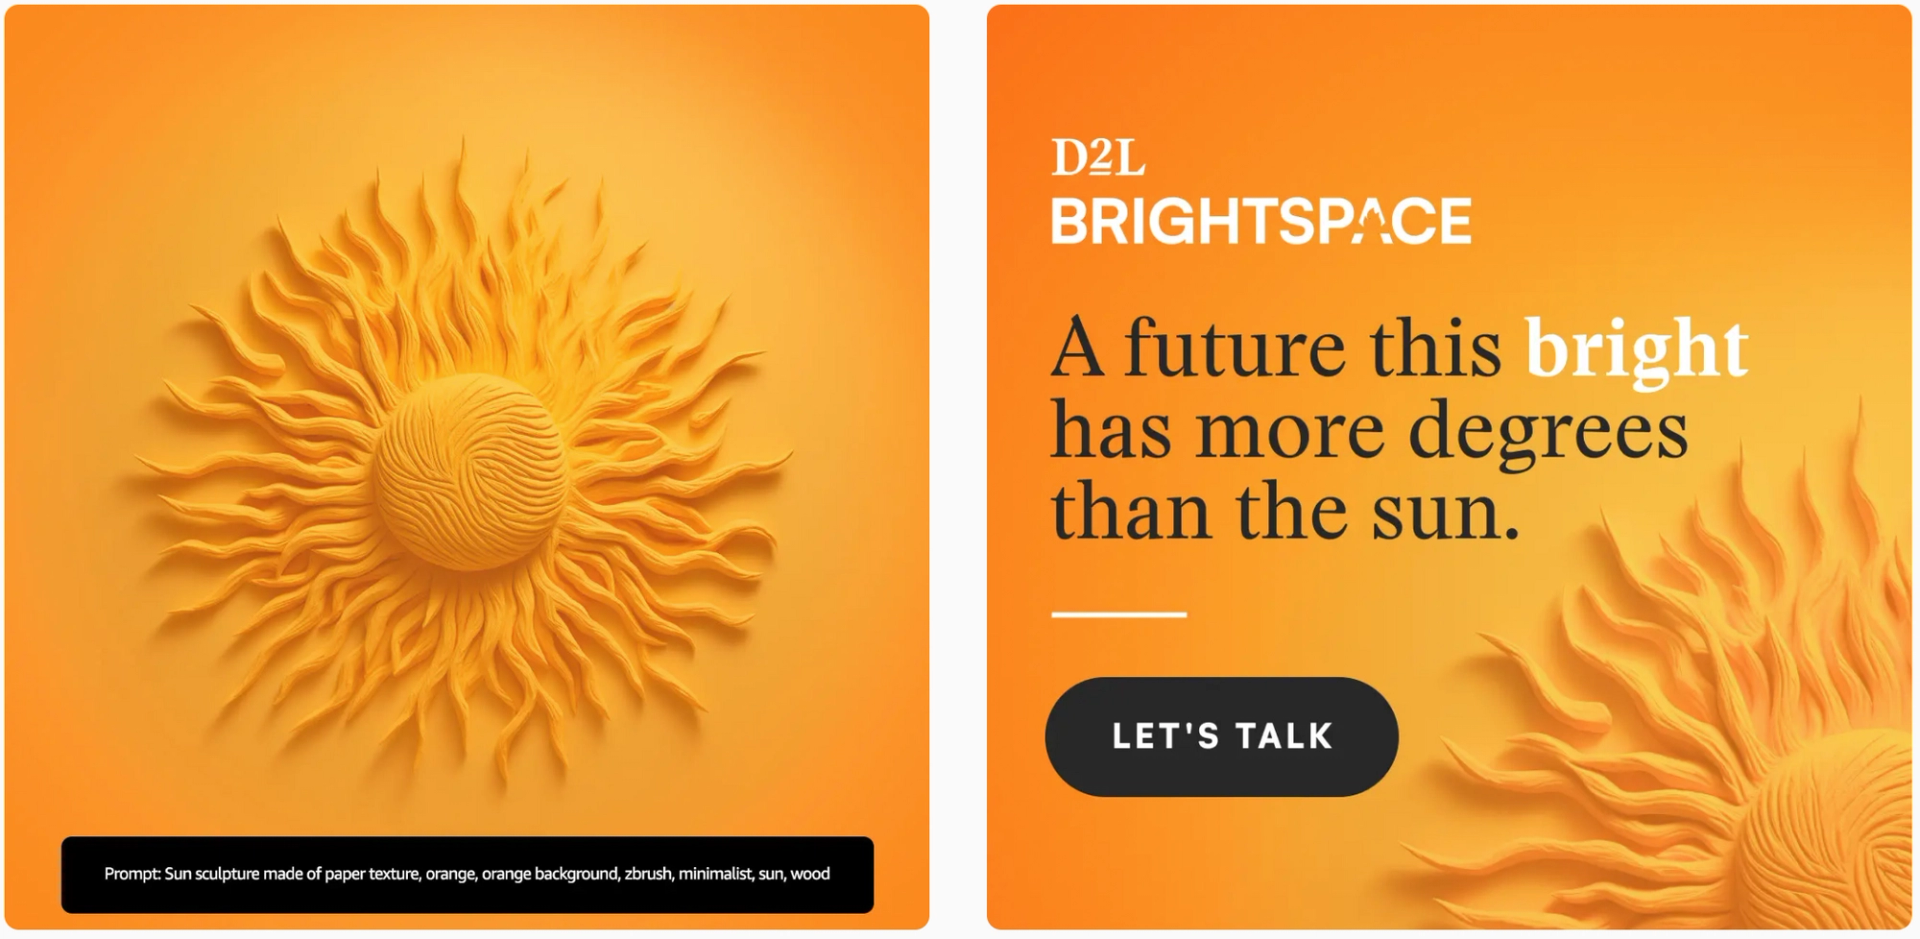 D2L Brightspace ad creative with prompt and final ad